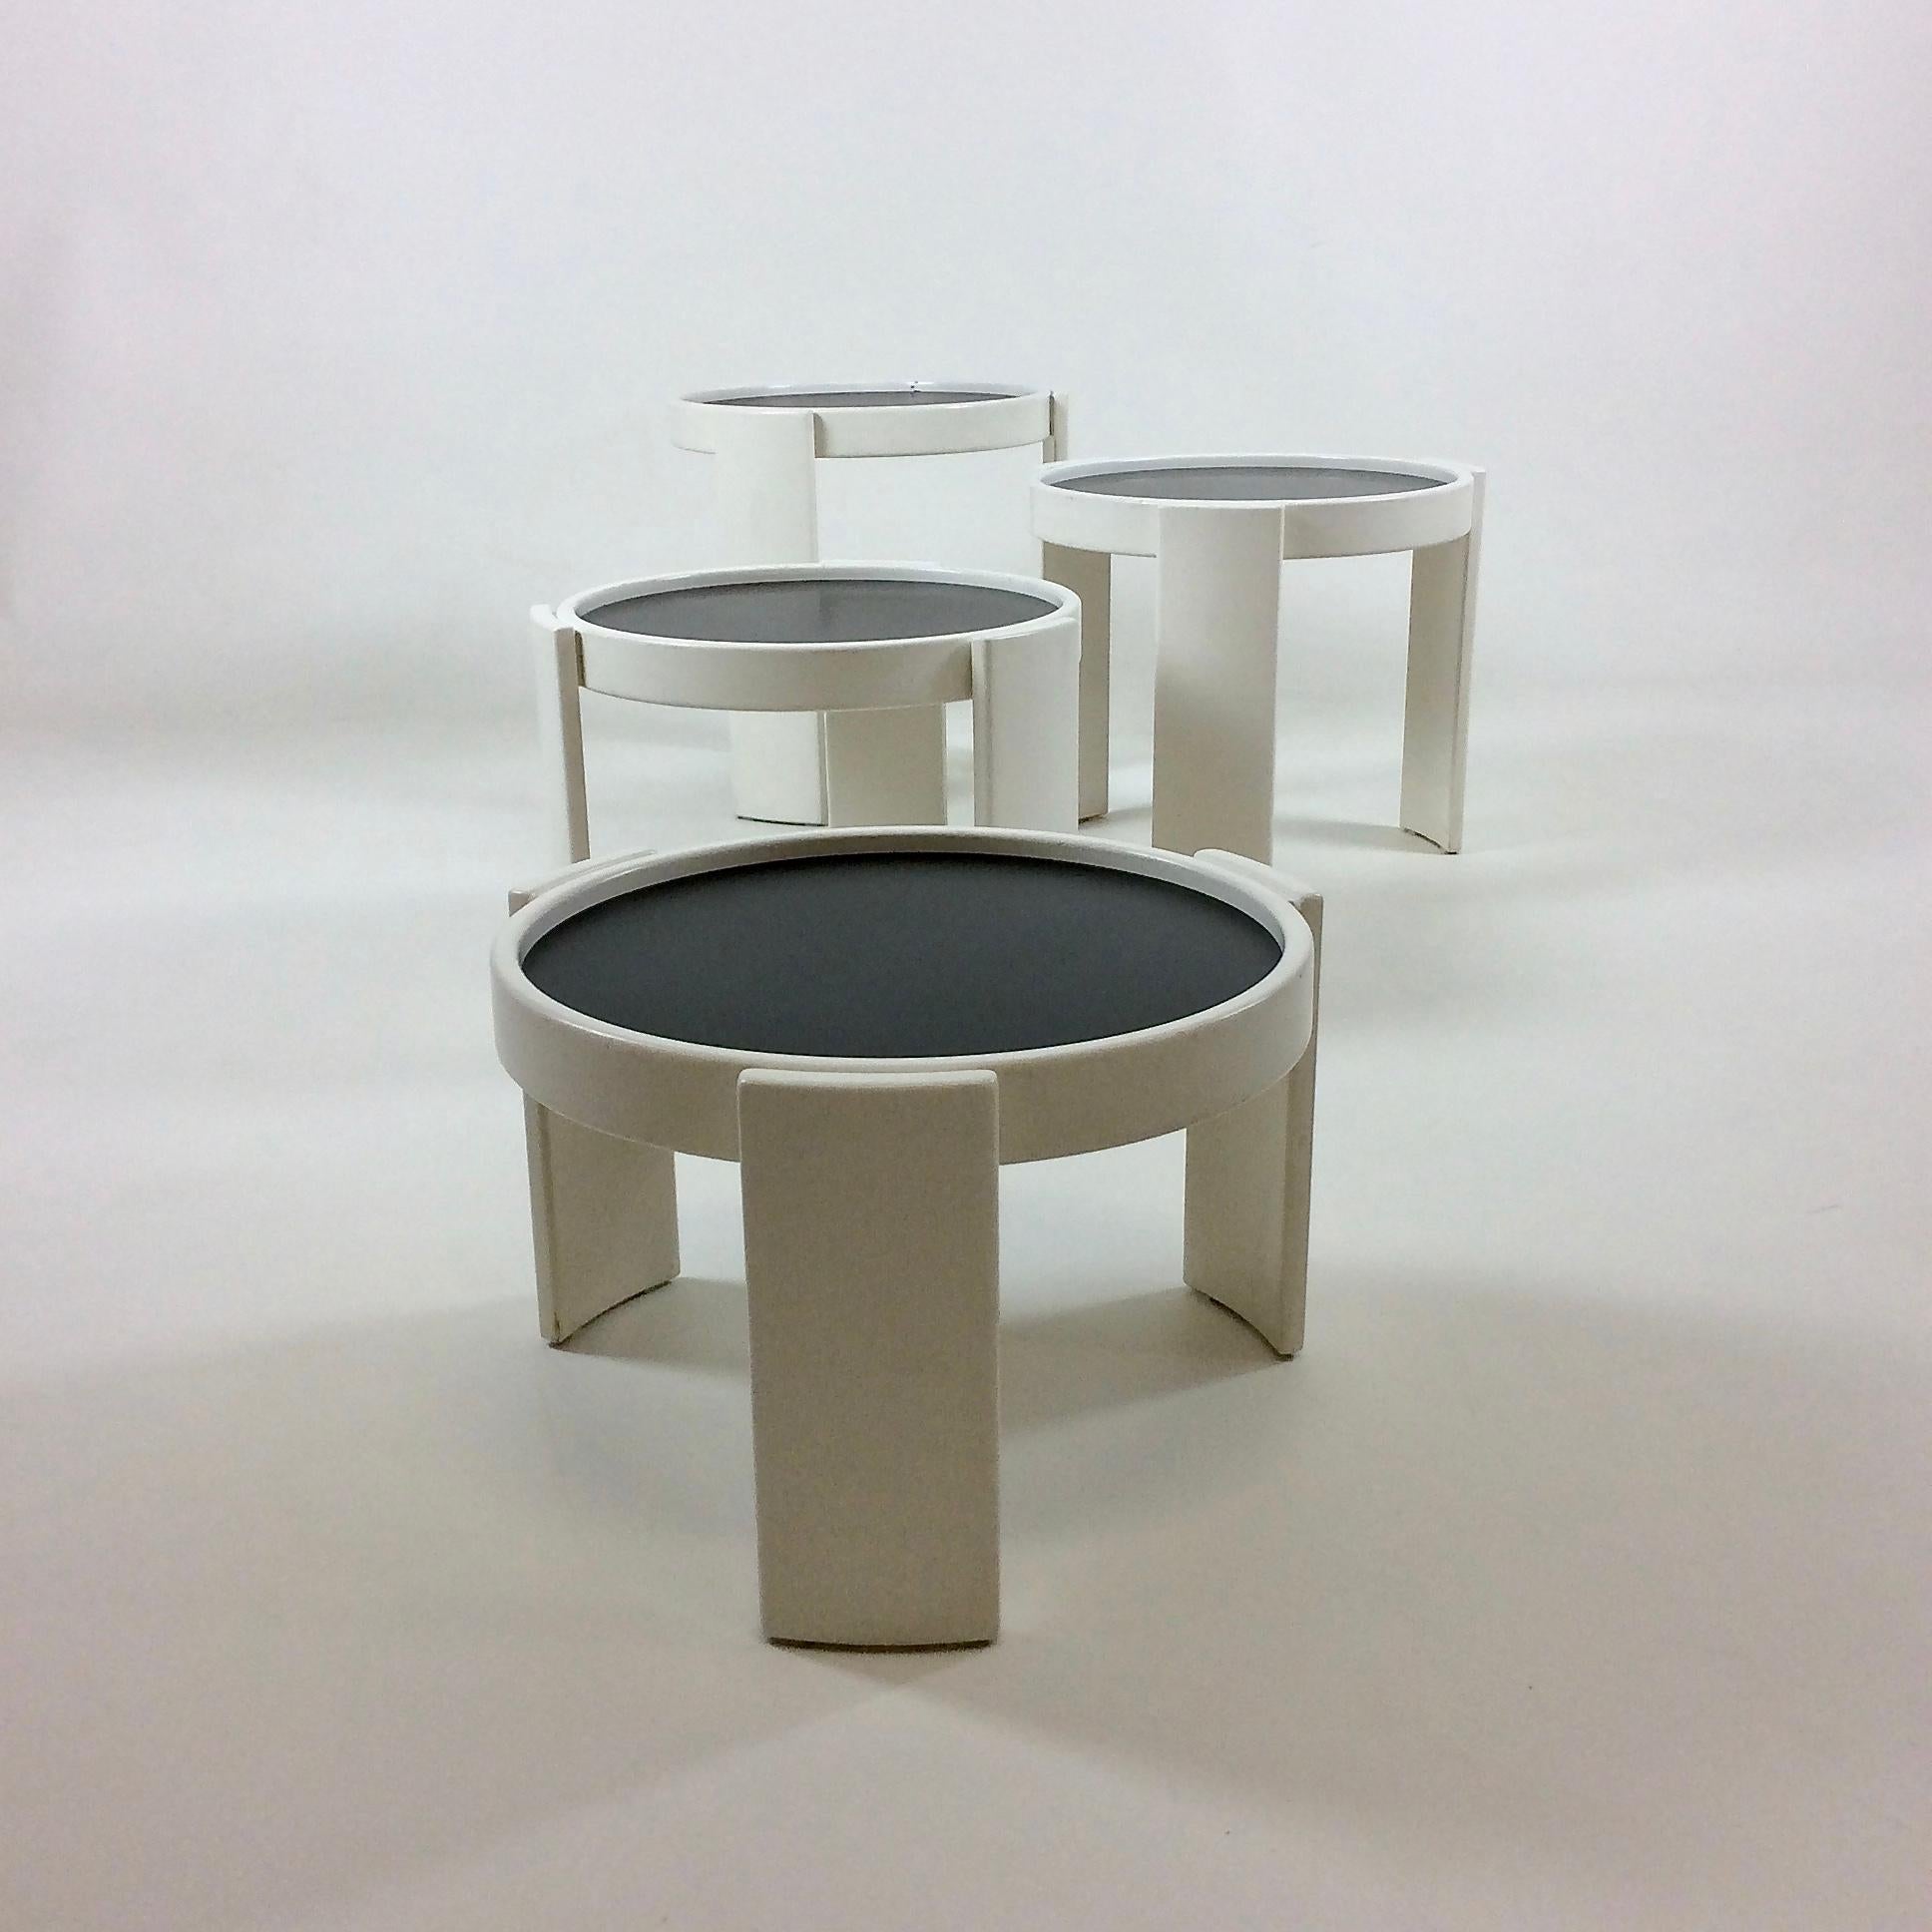 Lacquered Gianfranco Frattini '780' Nesting Tables for Cassina, circa 1960, Italy